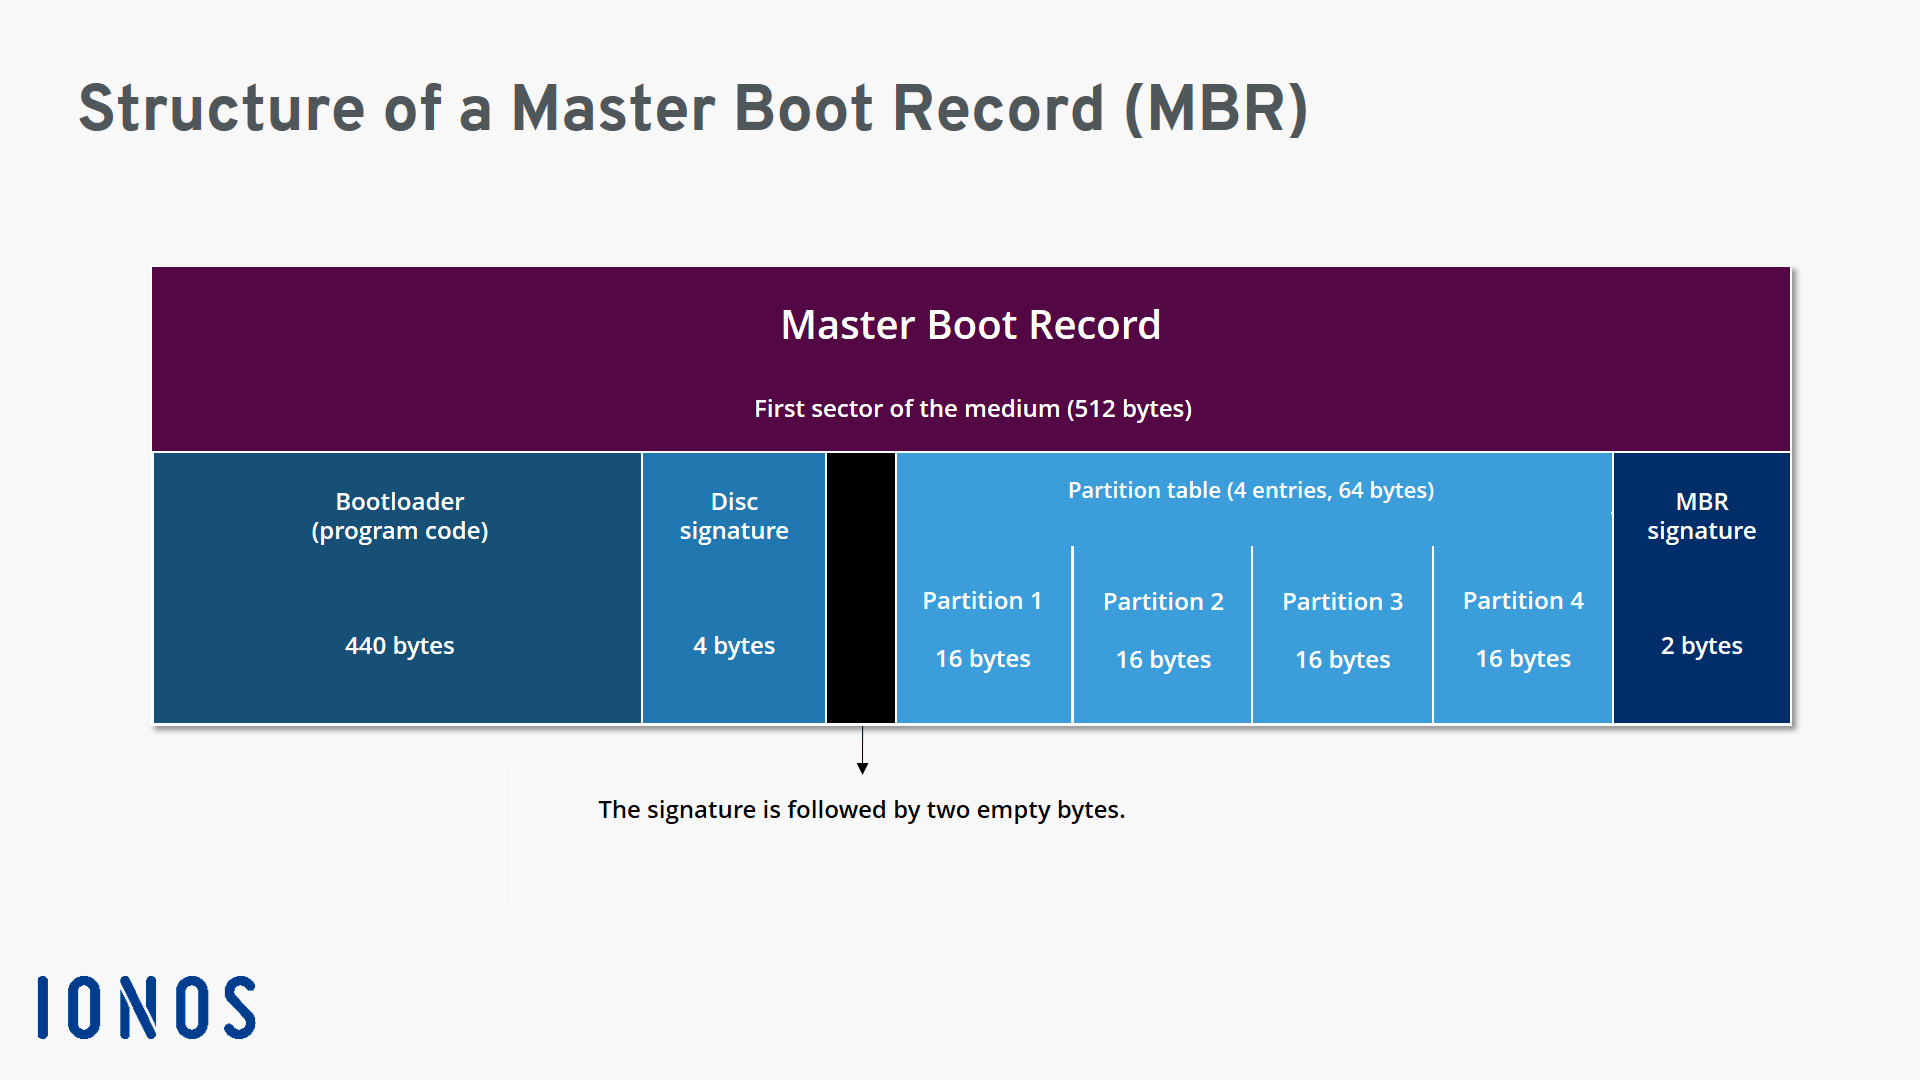 Graphical representation of how a master boot record is structured